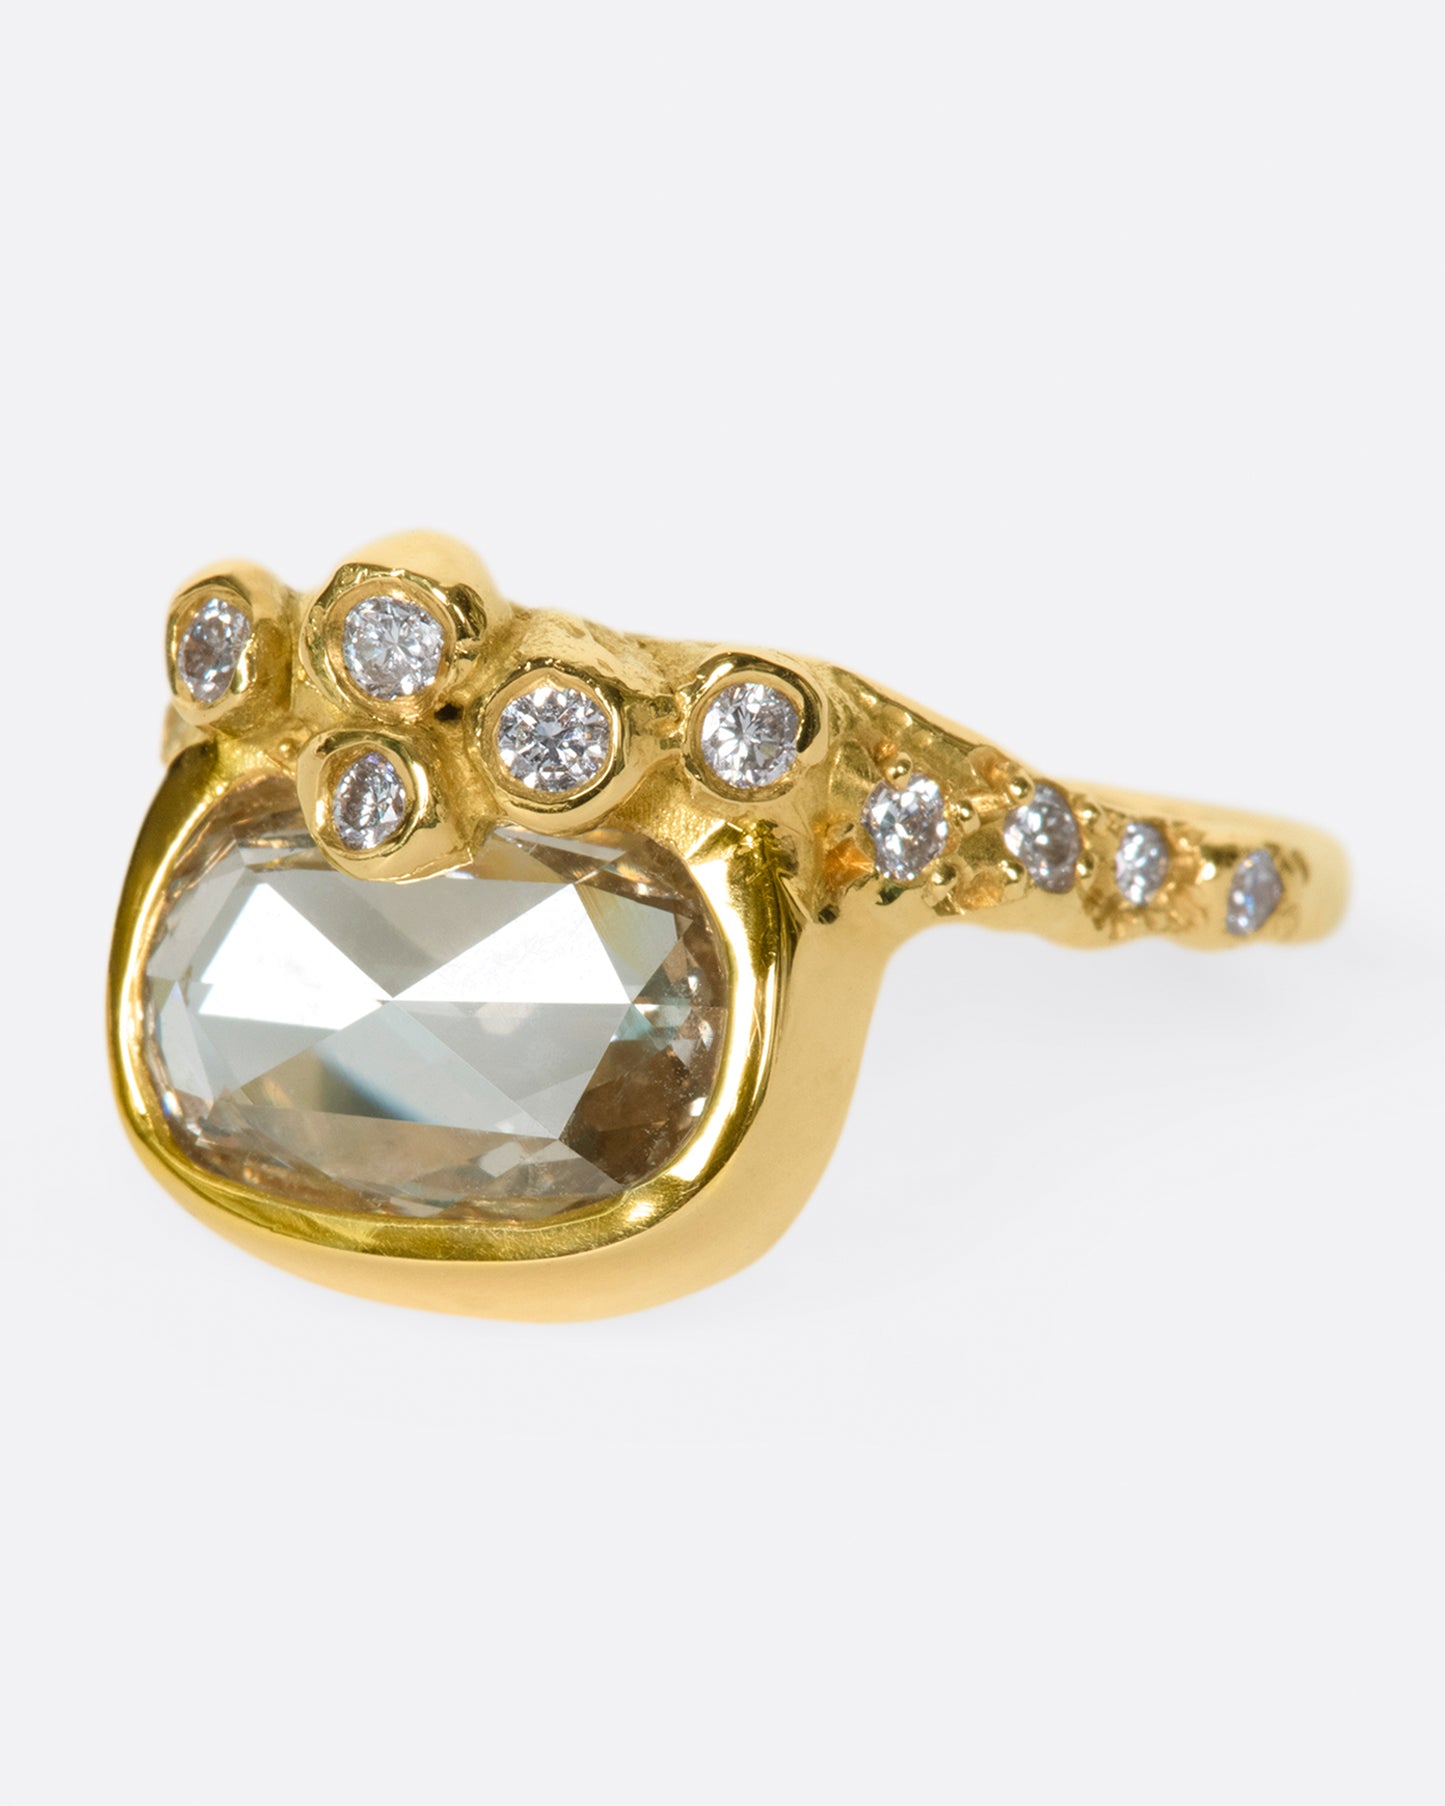 A yellow gold ring with an oval rose cut diamond sits atop an anemone-inspired band dotted with diamonds.